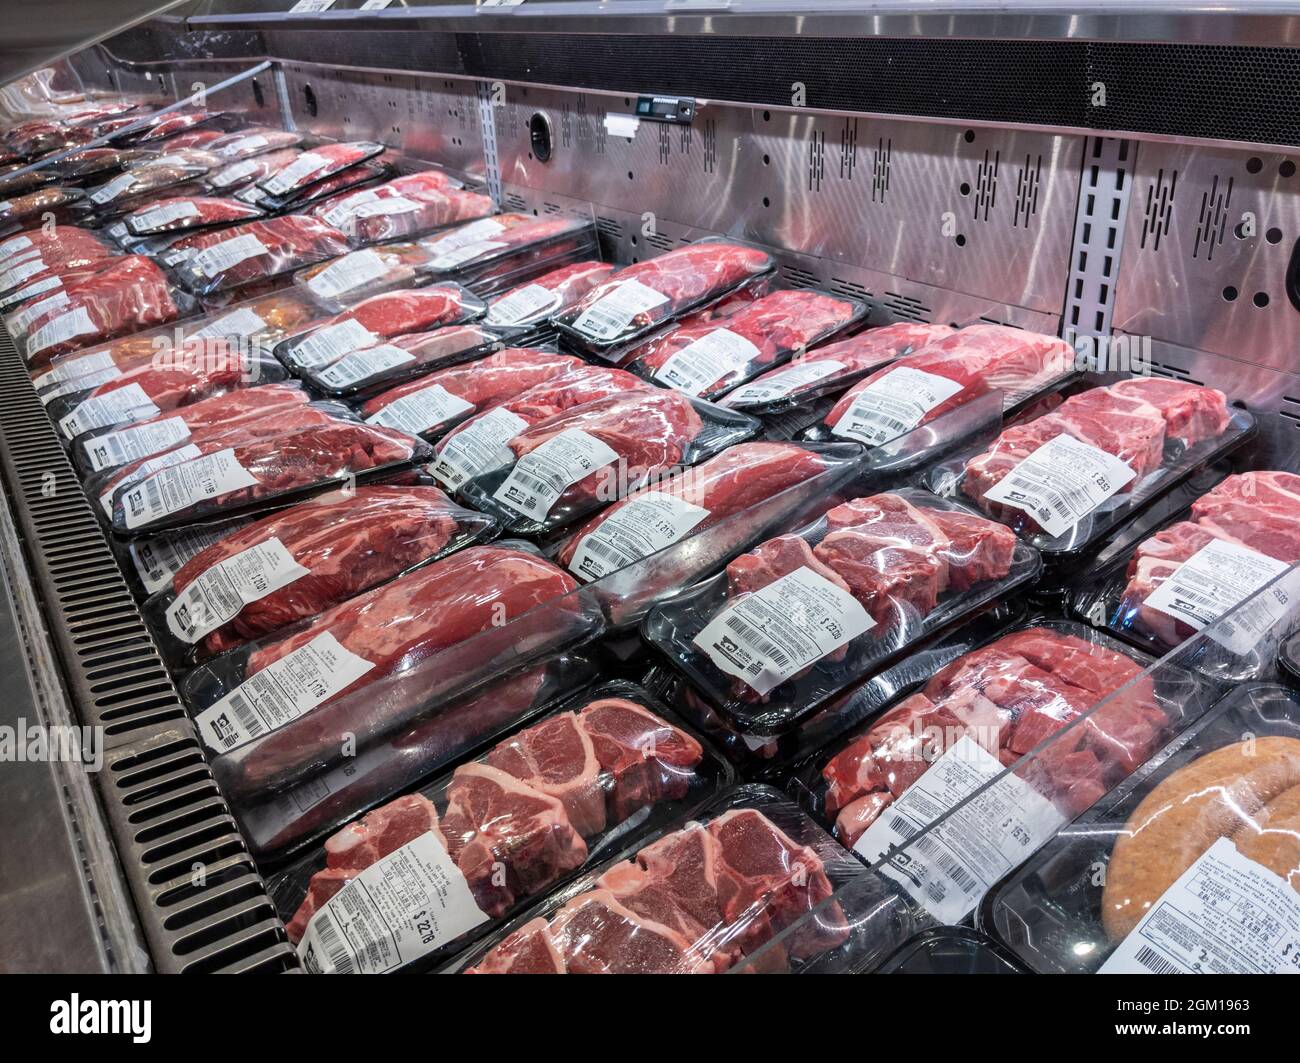 Kirkland WA USA - circa September 2021: Angled view of the refrigerated meats section inside a Whole Foods Market grocery store. Stock Photo